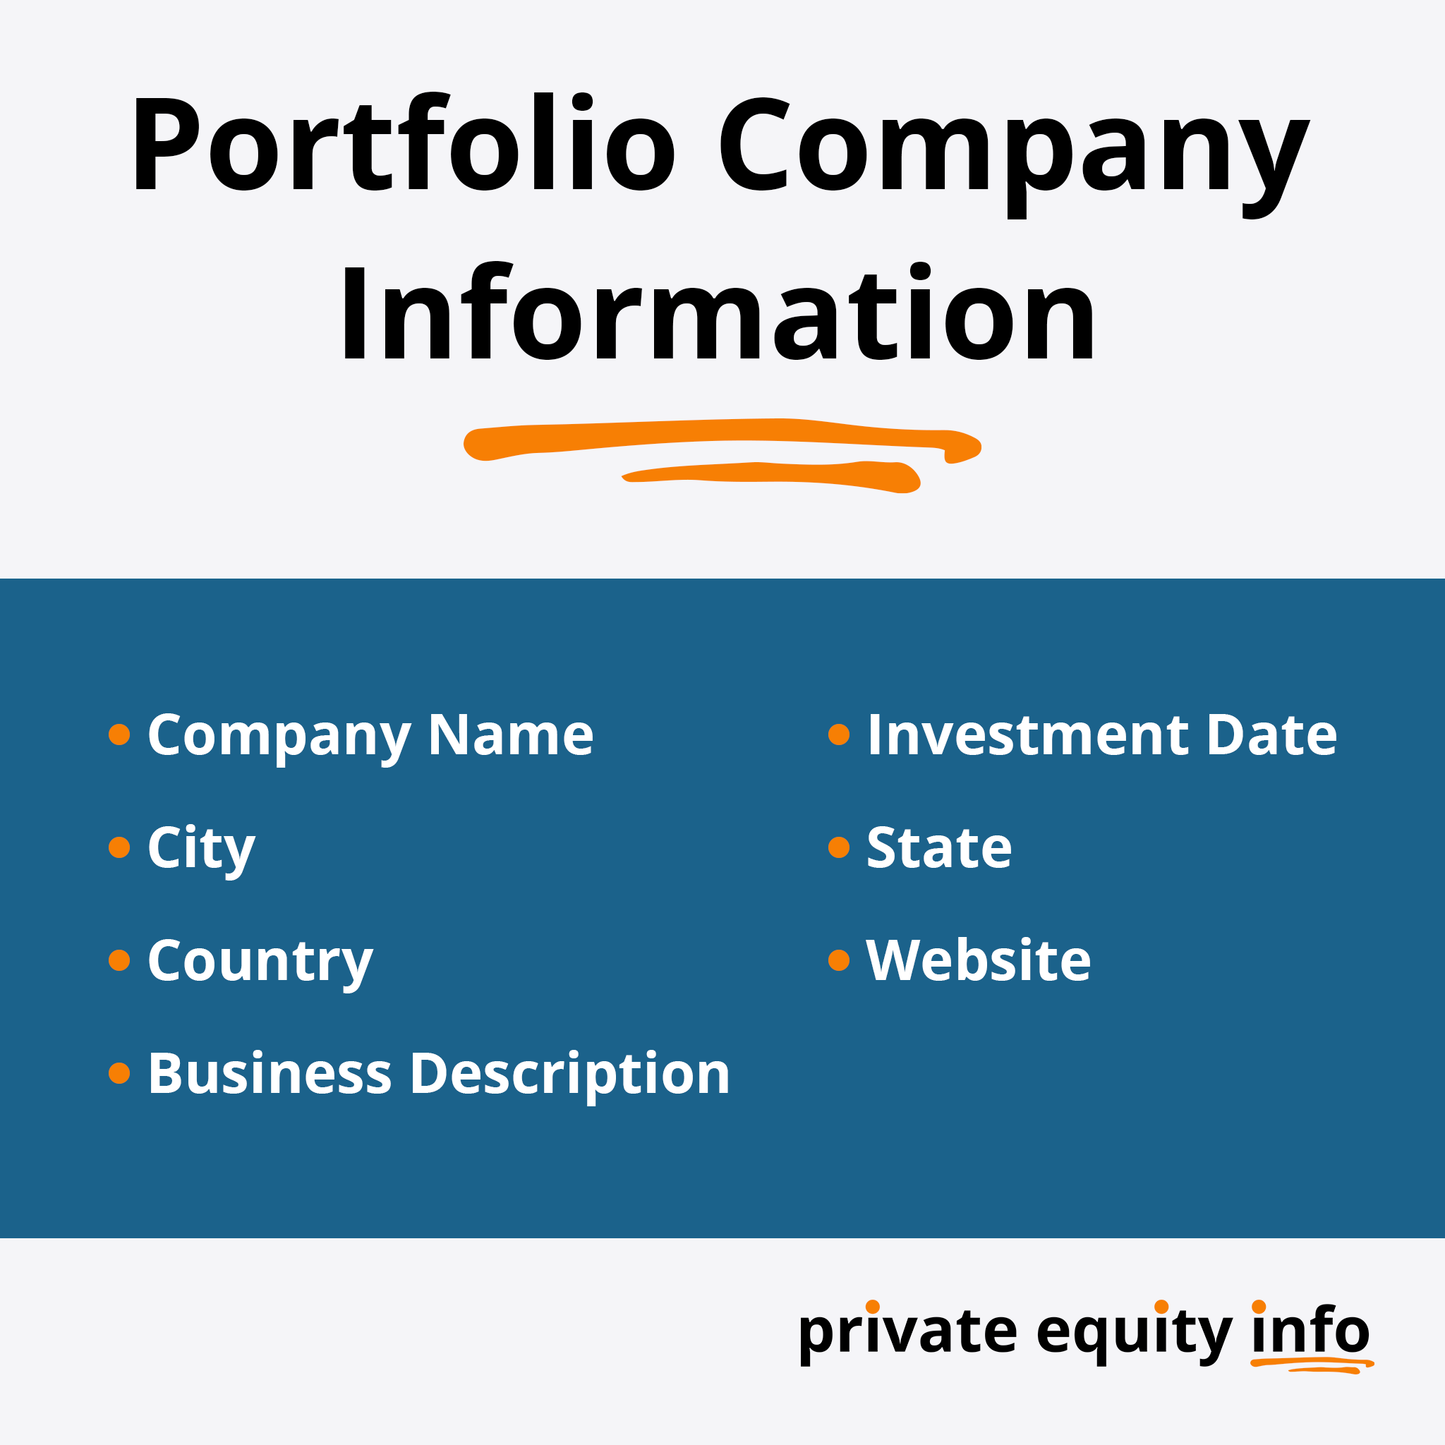 List of Private Equity Firms Investing in Oil & Gas Companies